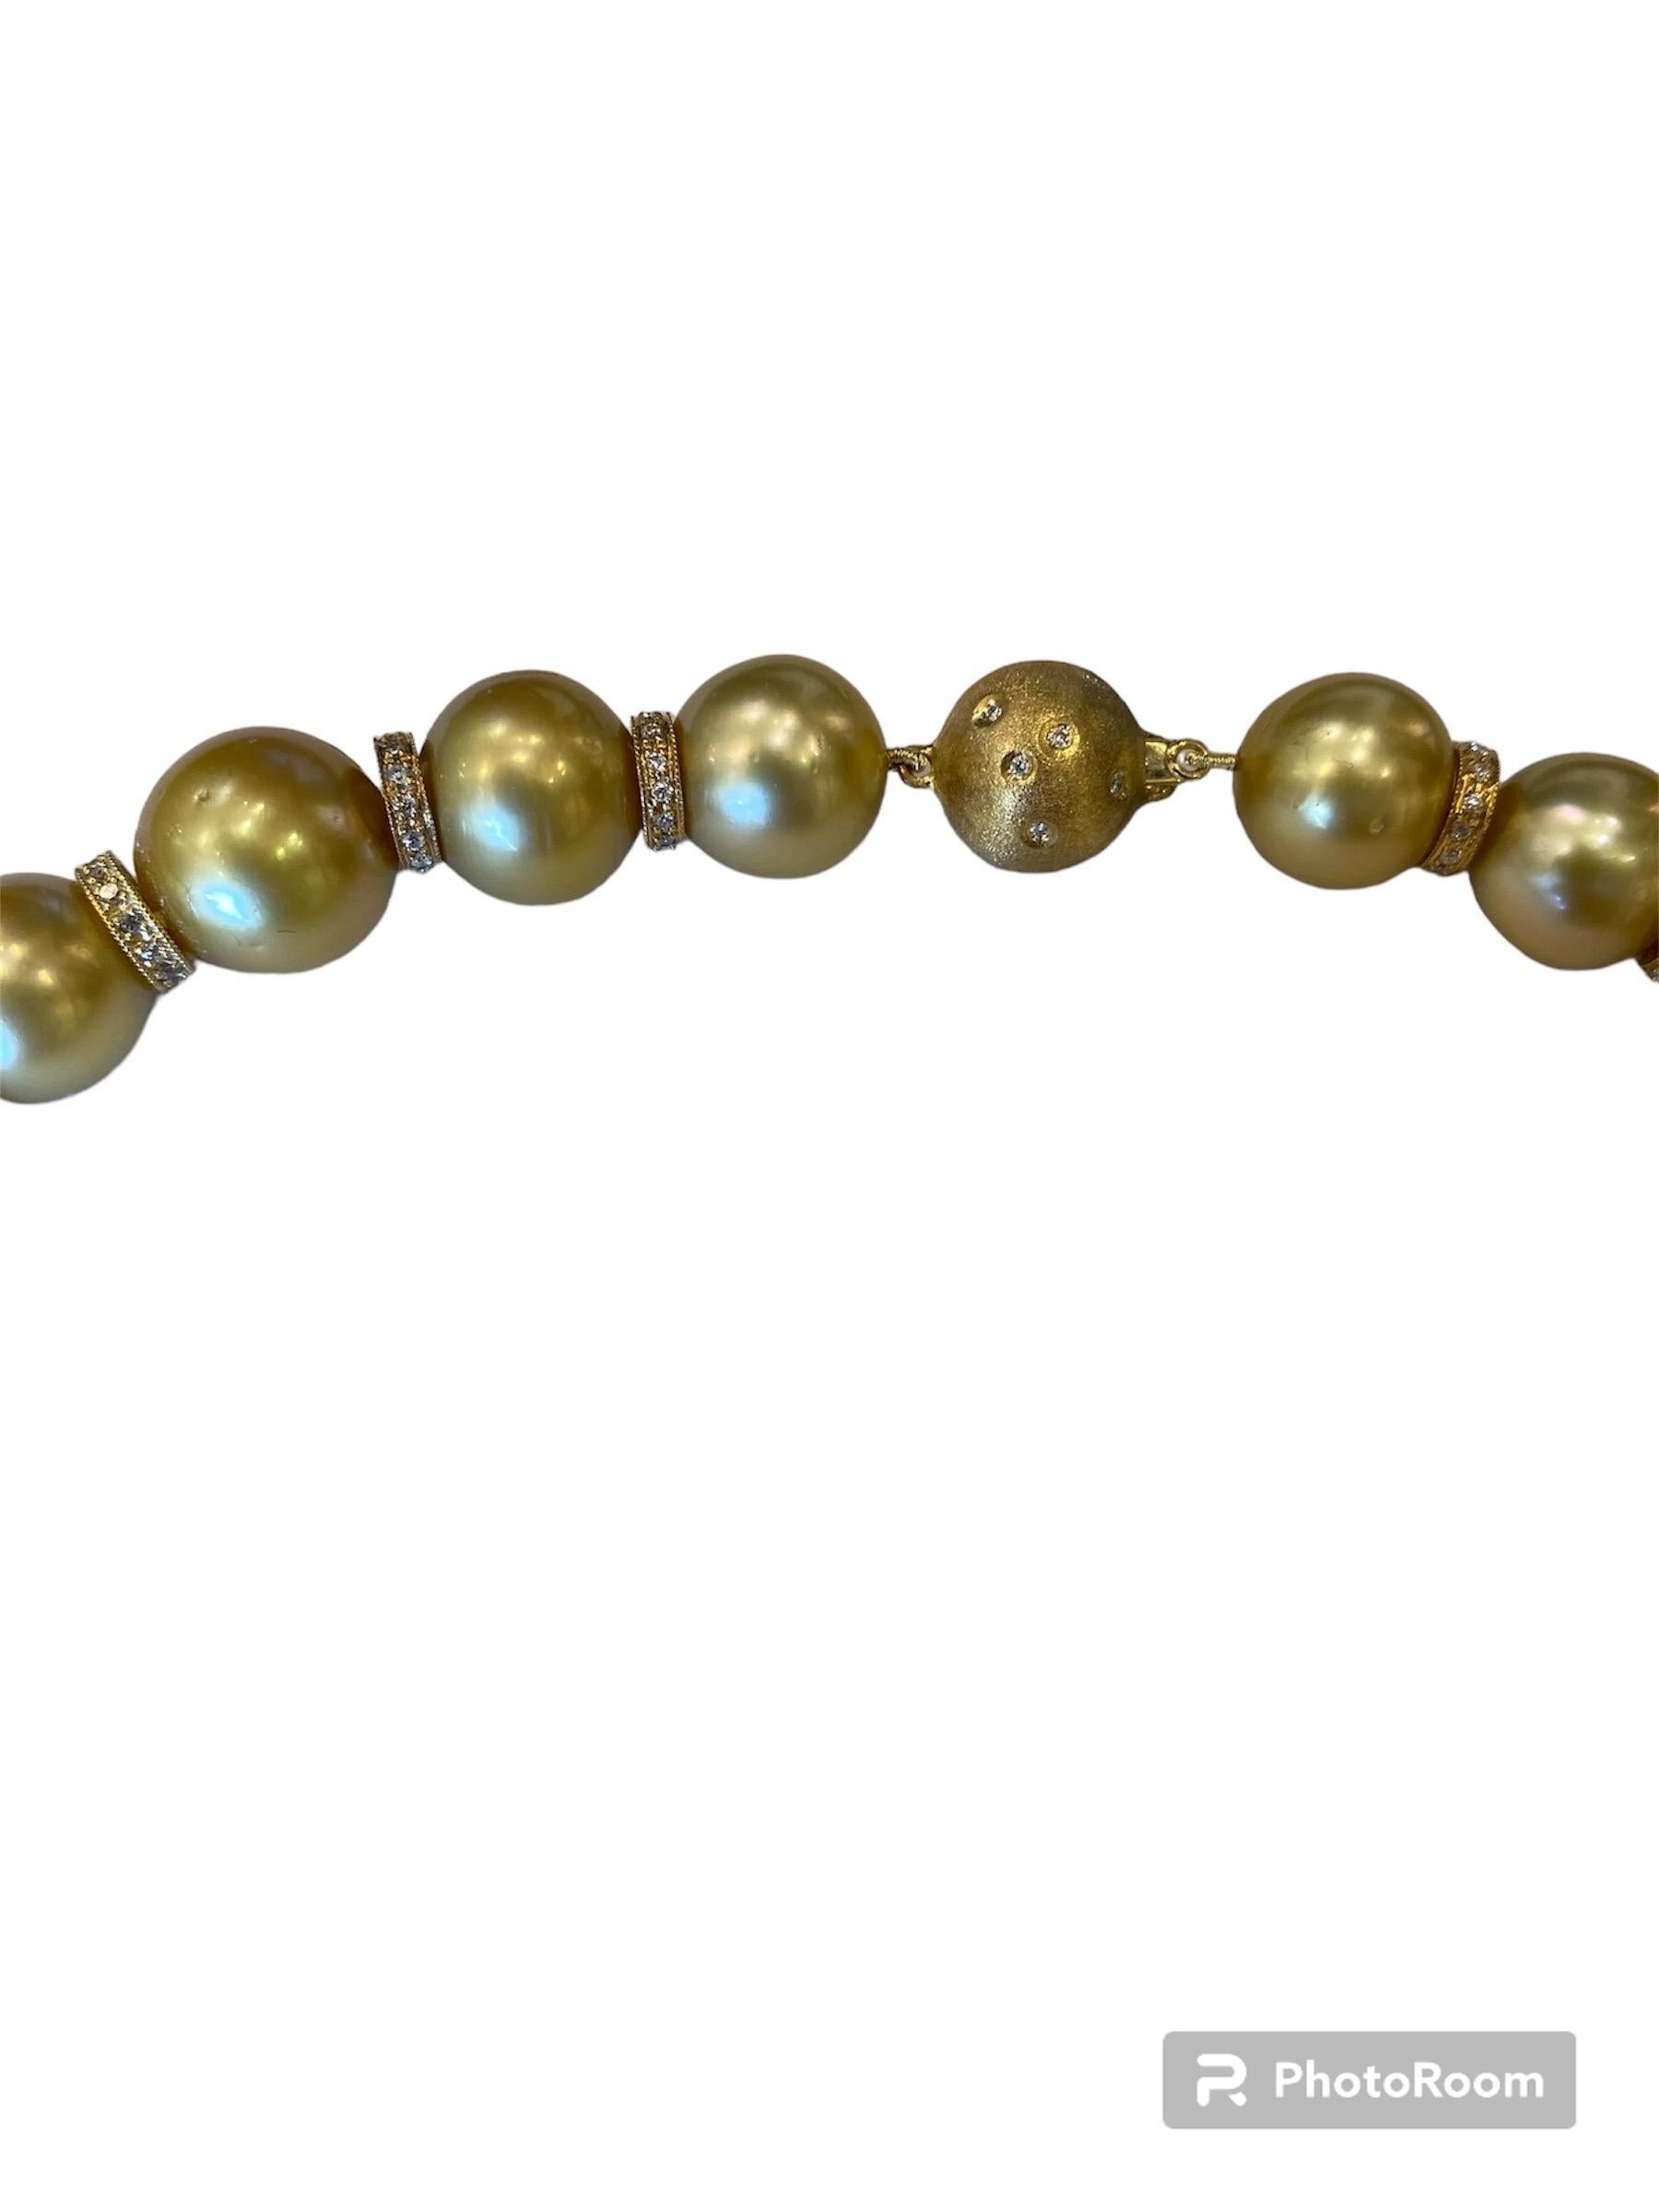 Brilliant Cut Golden South Seas Pearl Necklace with Diamond and Gold  For Sale